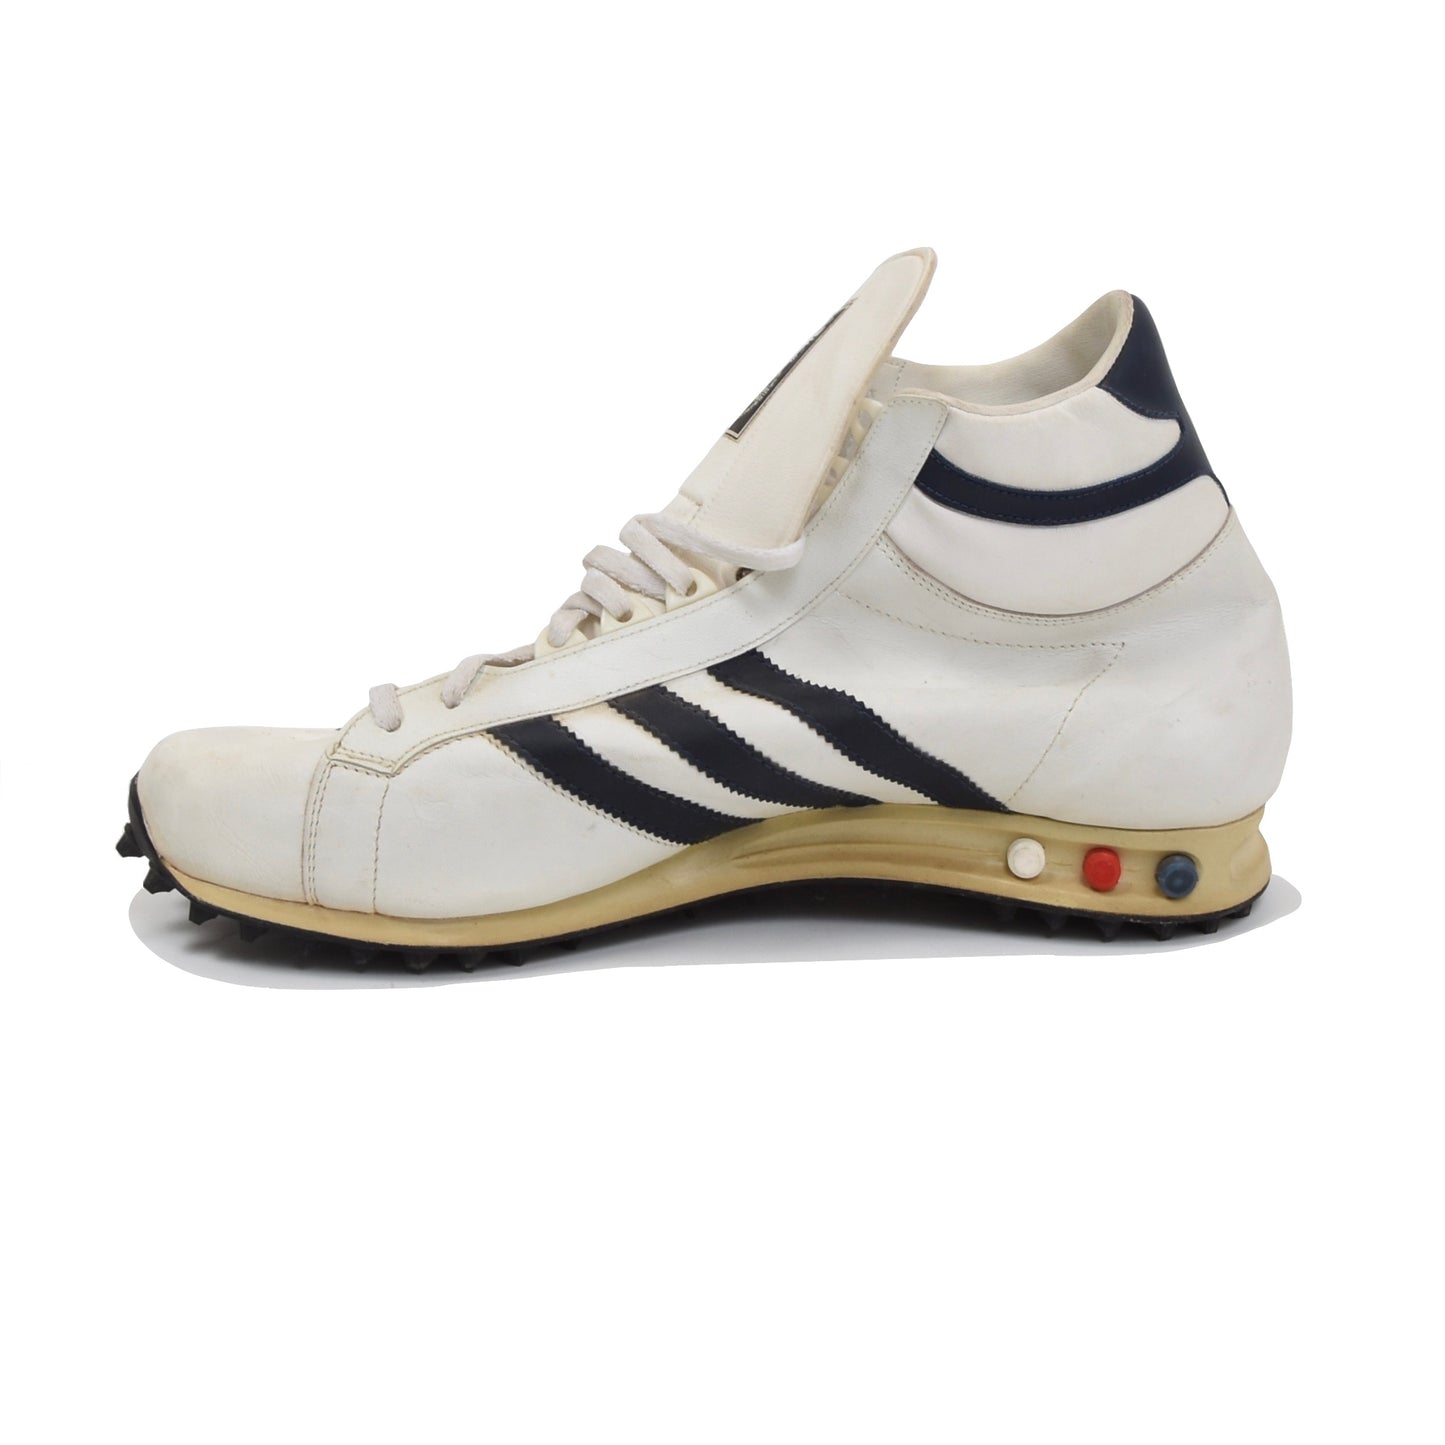 Vintage Adidas Jogging High Sneakers Size 12 - 47 1/3 - White/Navy